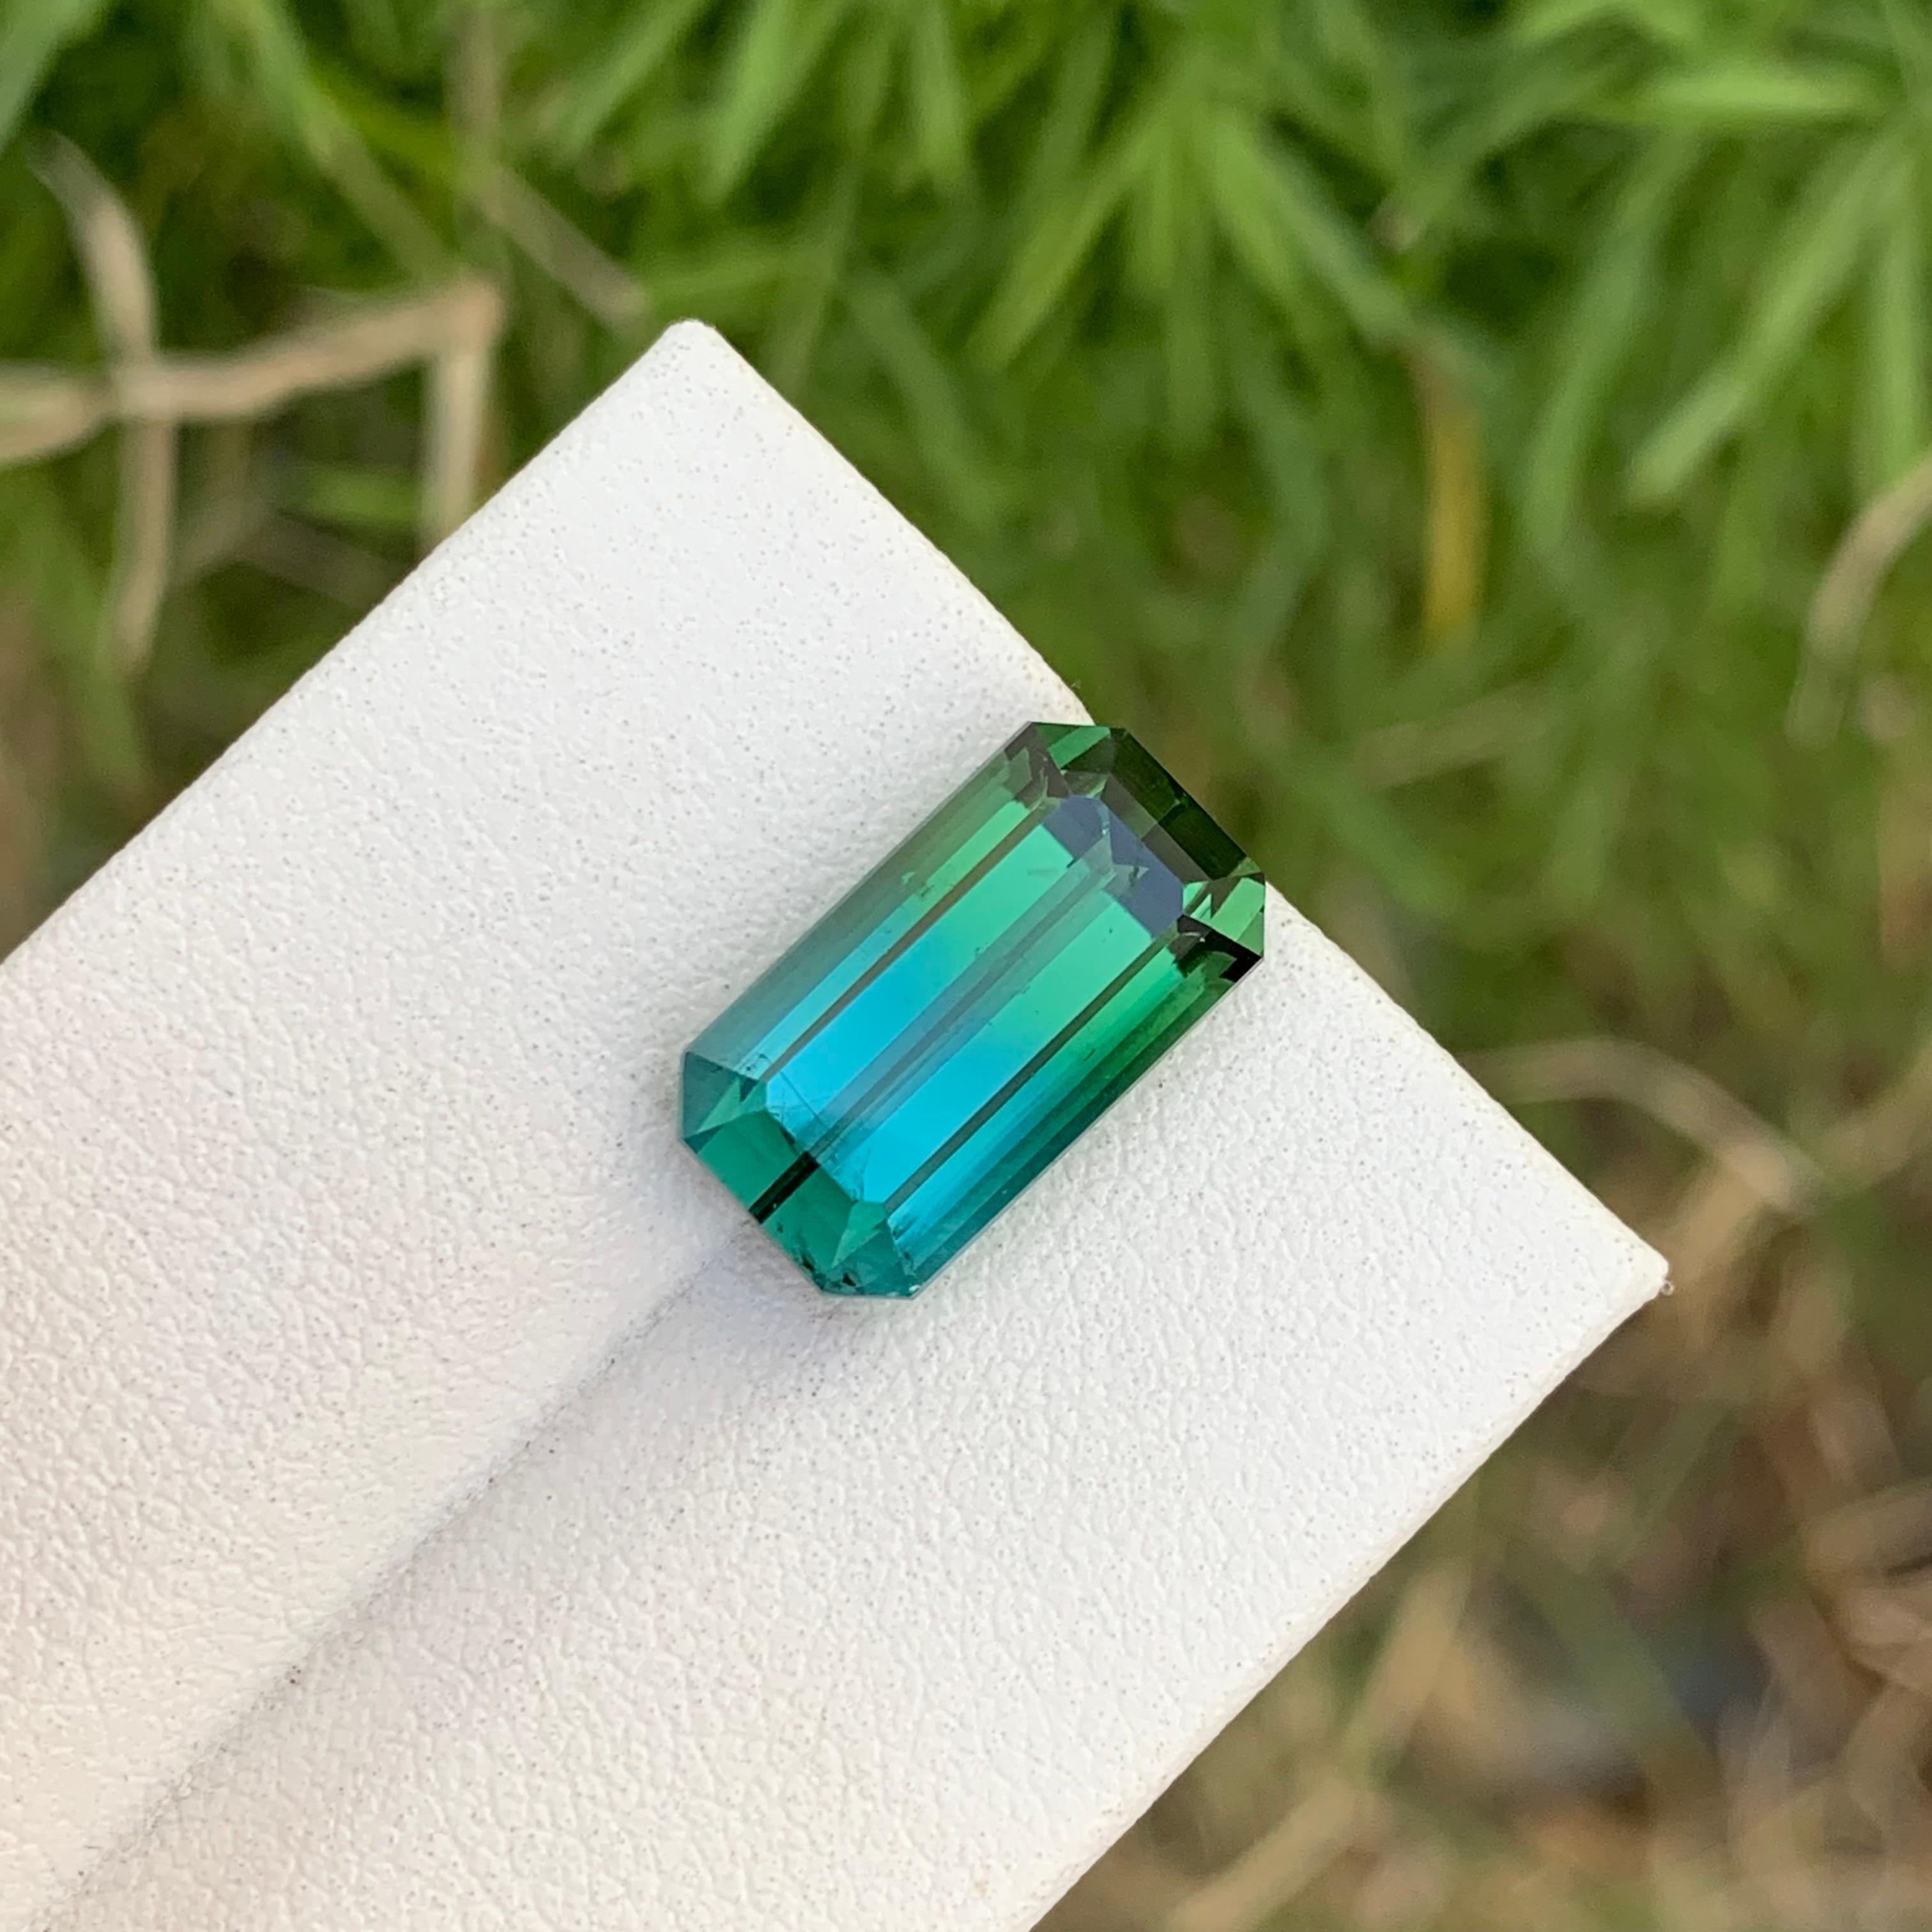 Loose Bi Colour Tourmaline

Weight: 7.80 Carats
Dimension: 14.1 x 7.8 x 7.5 Mm
Colour: Mint And Aqua Blue
Origin: Afghanistan
Certificate: On Demand
Treatment: Non

Tourmaline is a captivating gemstone known for its remarkable variety of colors,